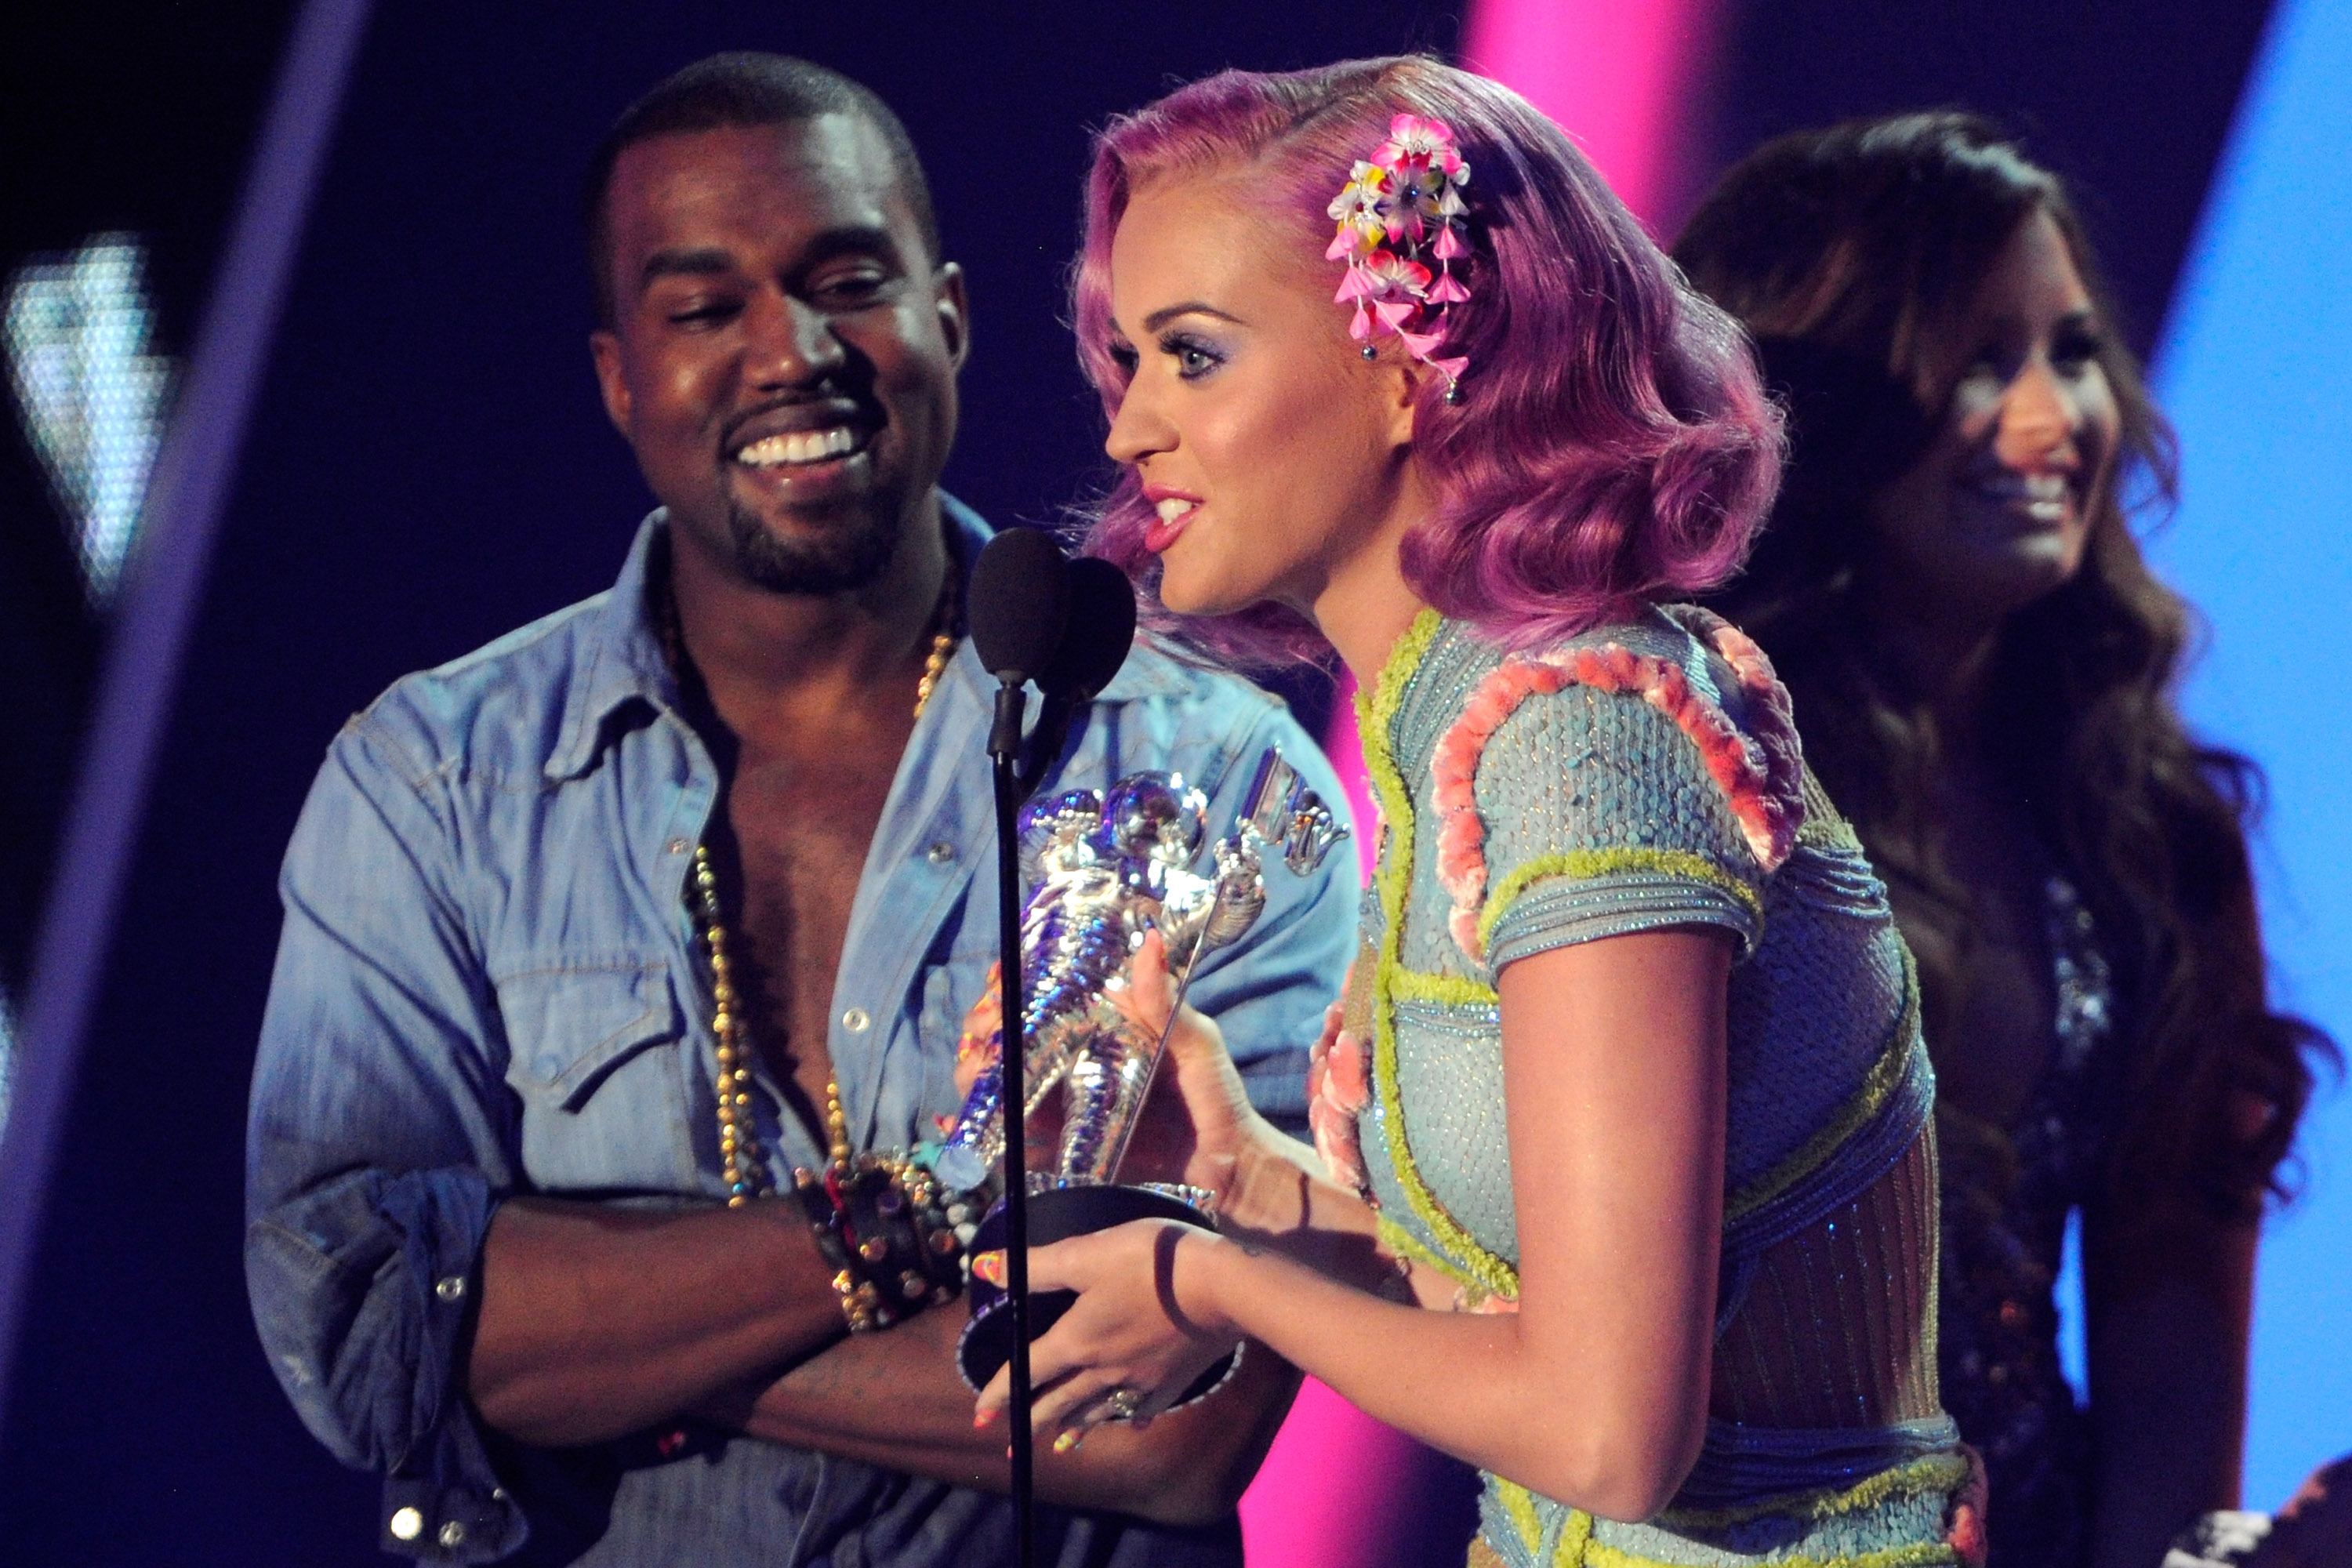 Katy Perry at the 2011 MTV Video Music Awards in LA on 28th August 2011